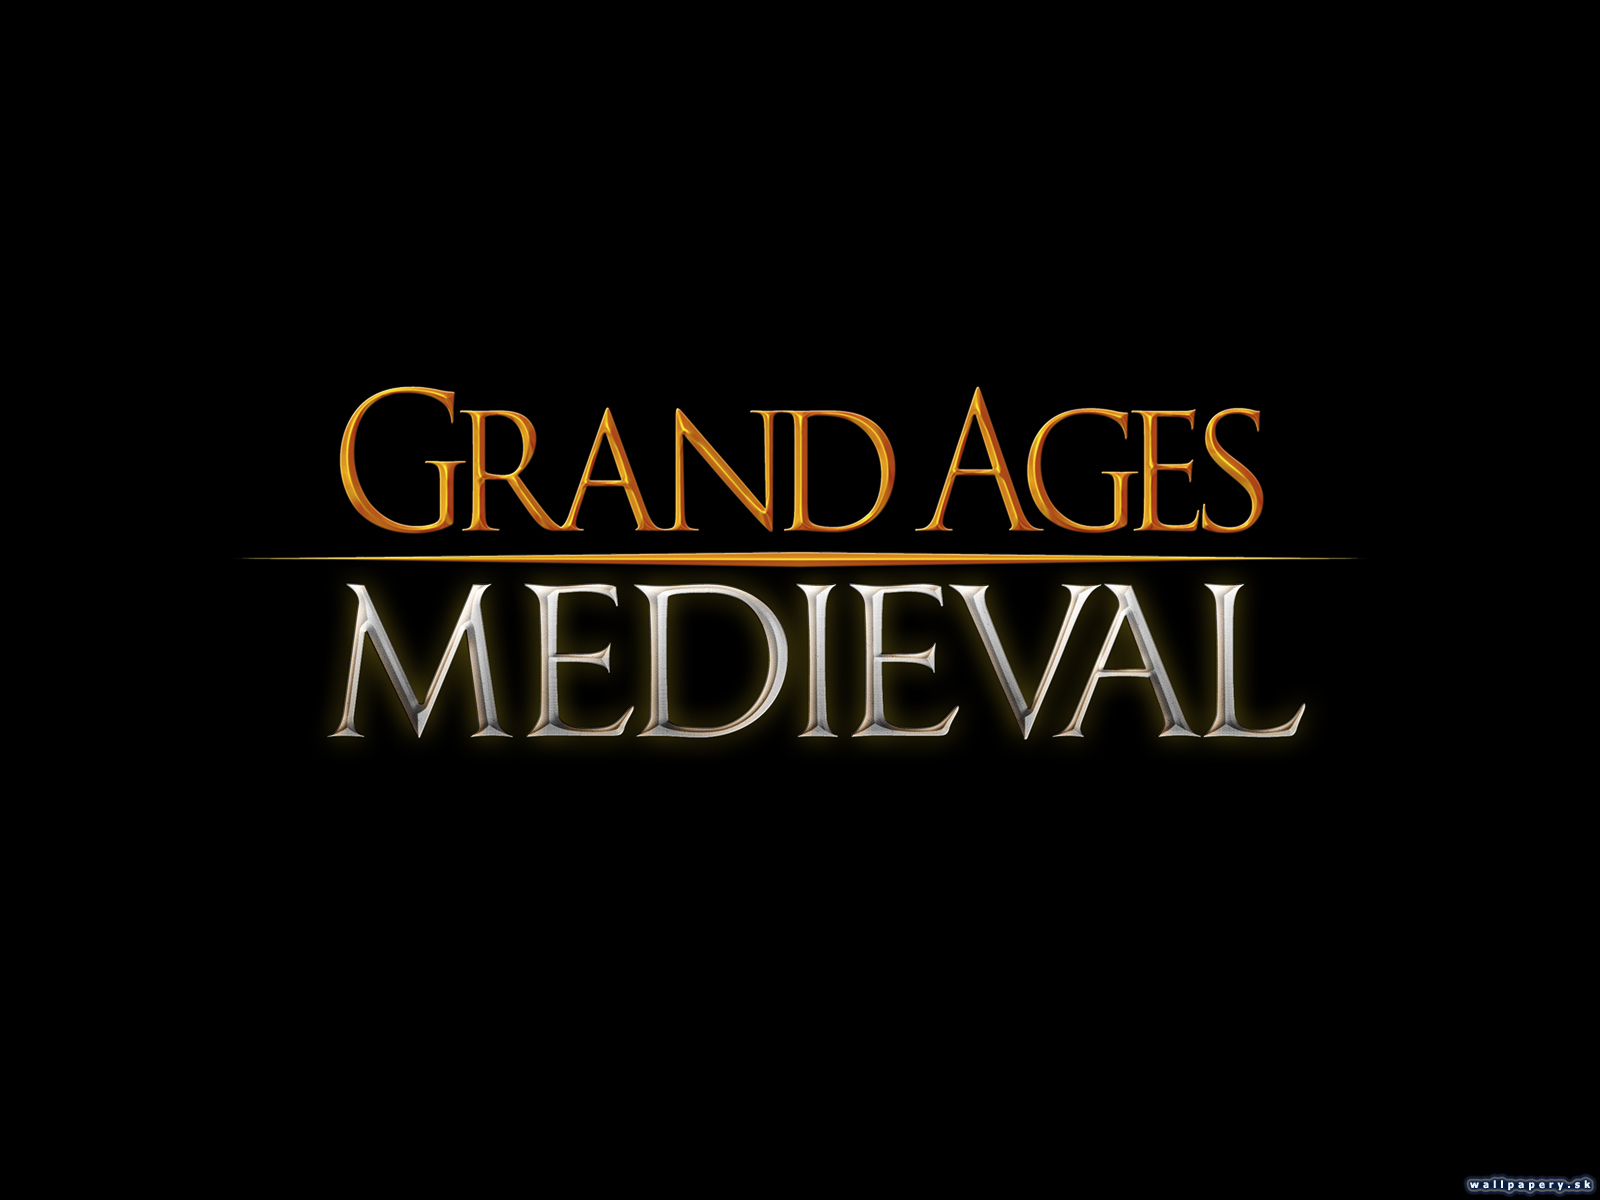 Grand Ages: Medieval - wallpaper 4